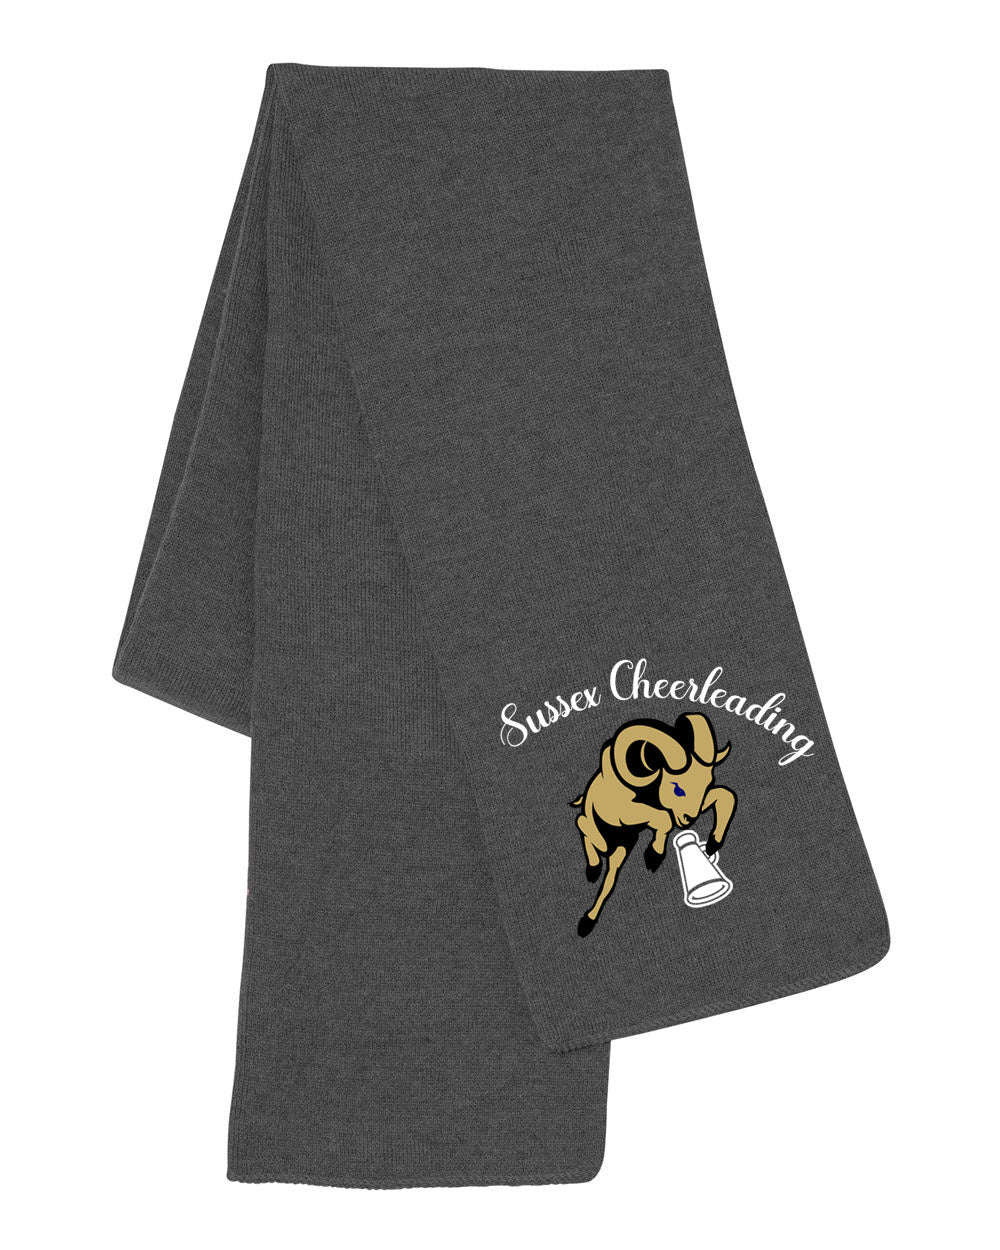 Sussex Middle Cheer Design 3 Scarf